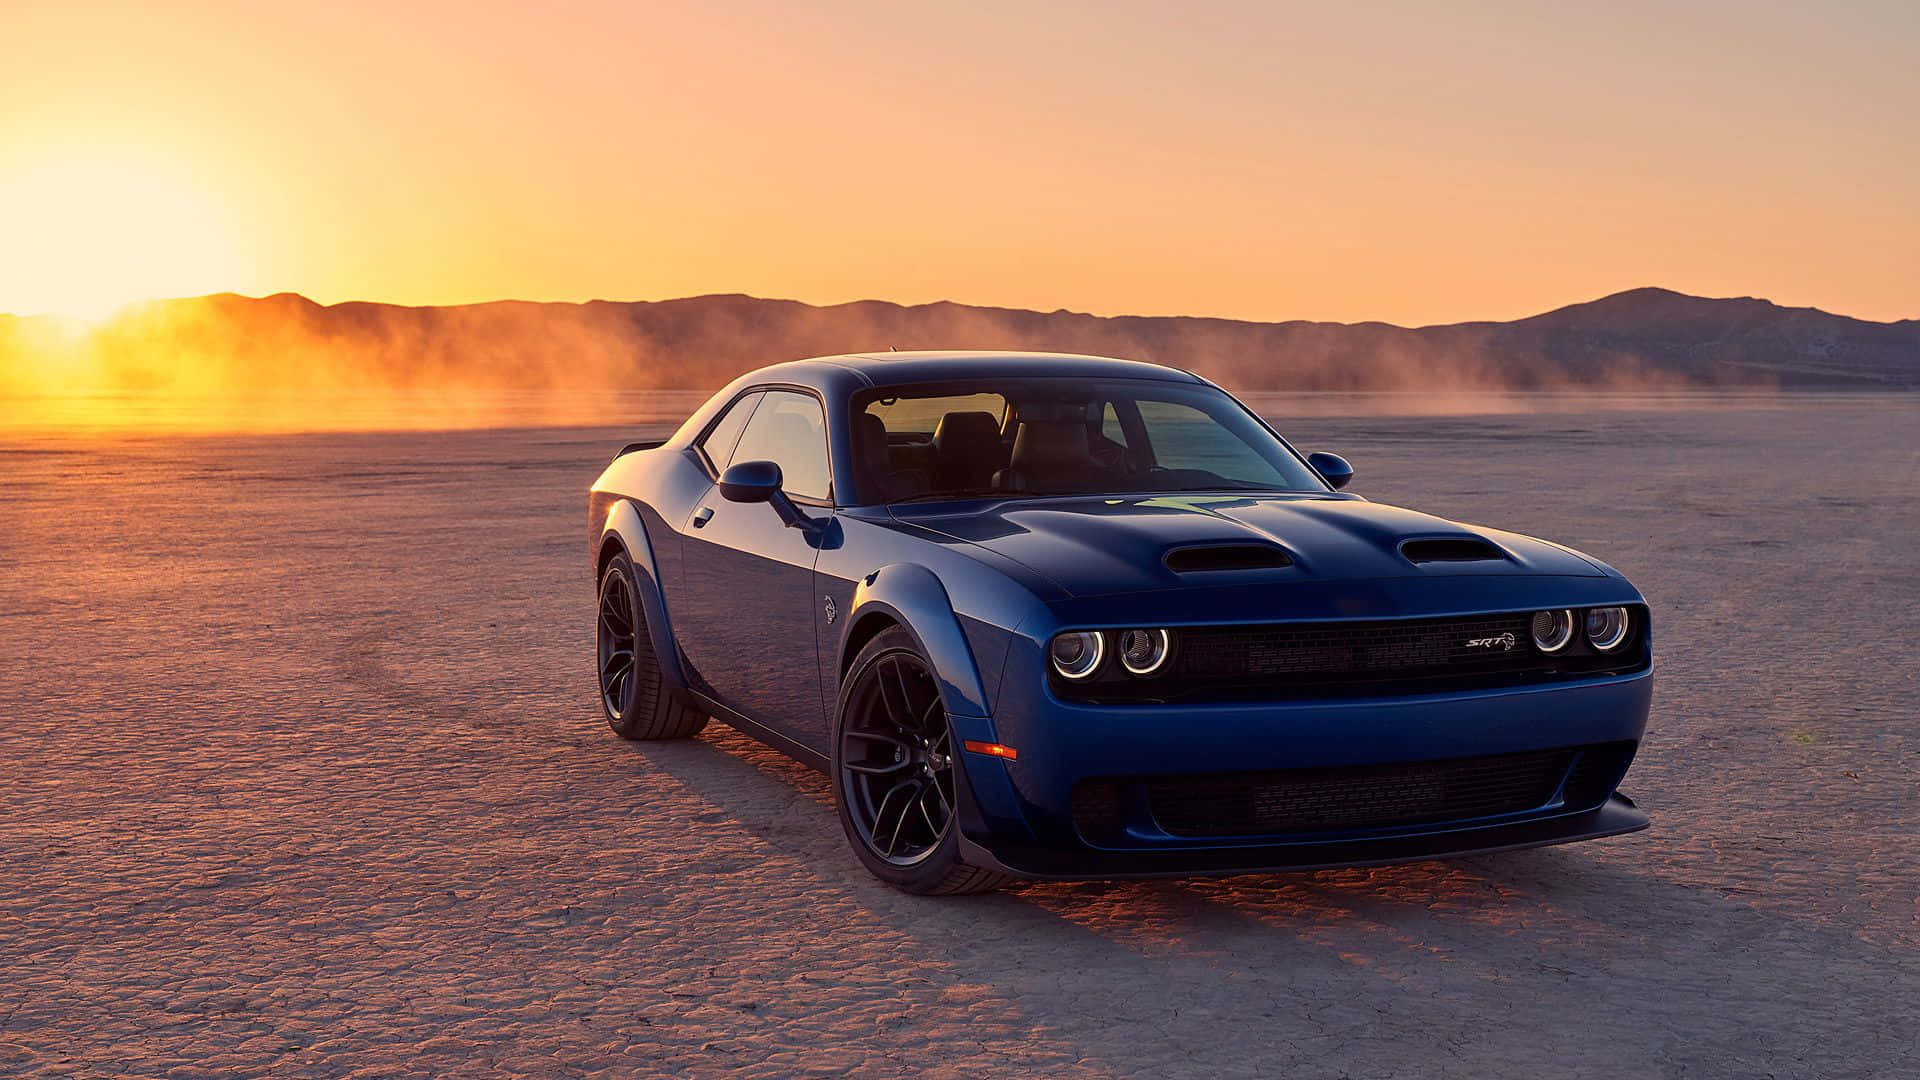 Experience pure power with the Dodge Challenger SRT Hellcat Wallpaper